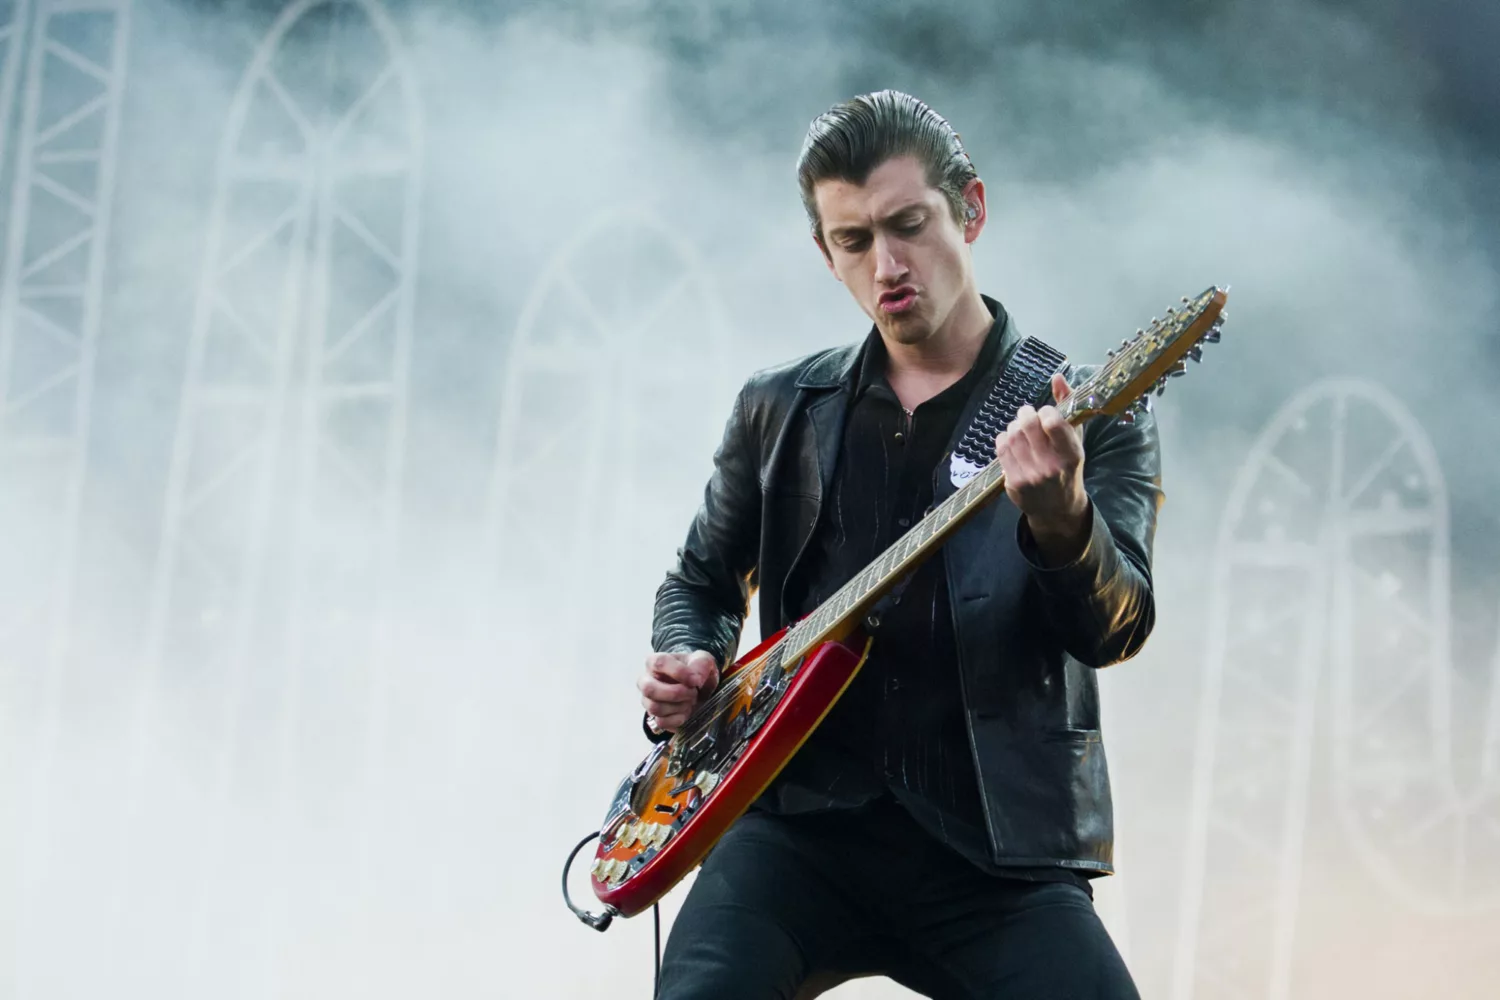 Arctic Monkeys, The National, Björk and more to play Primavera Sound 2018